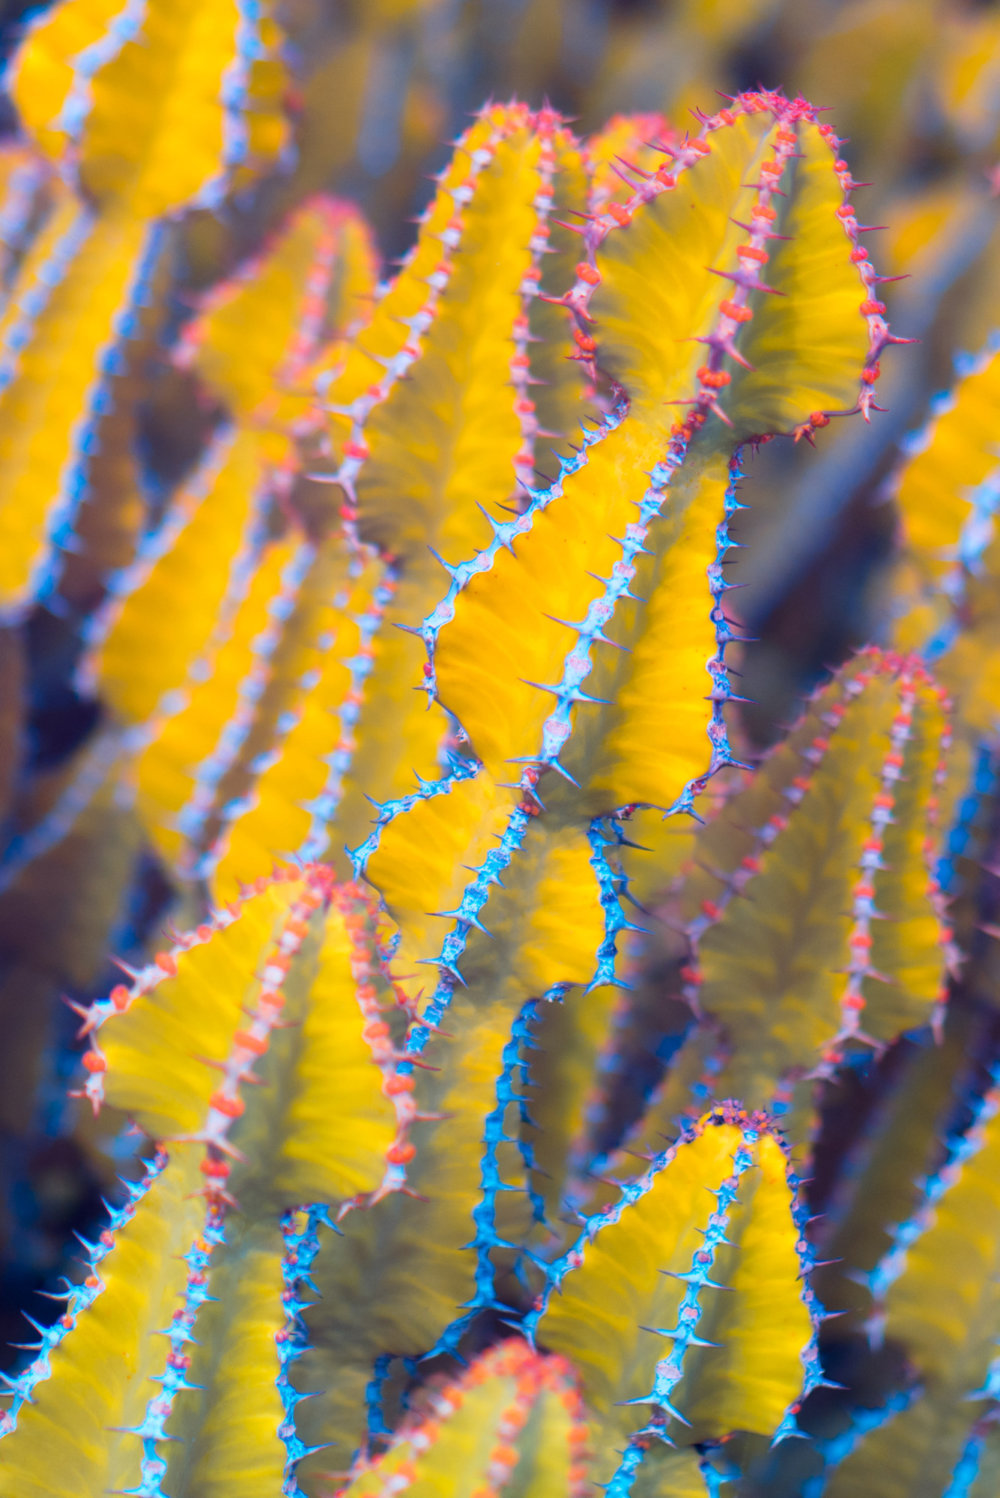 Suprachromacy Stunning Infrared Macro Photographs Of Canary Island Plants By Marcus Wendt 1